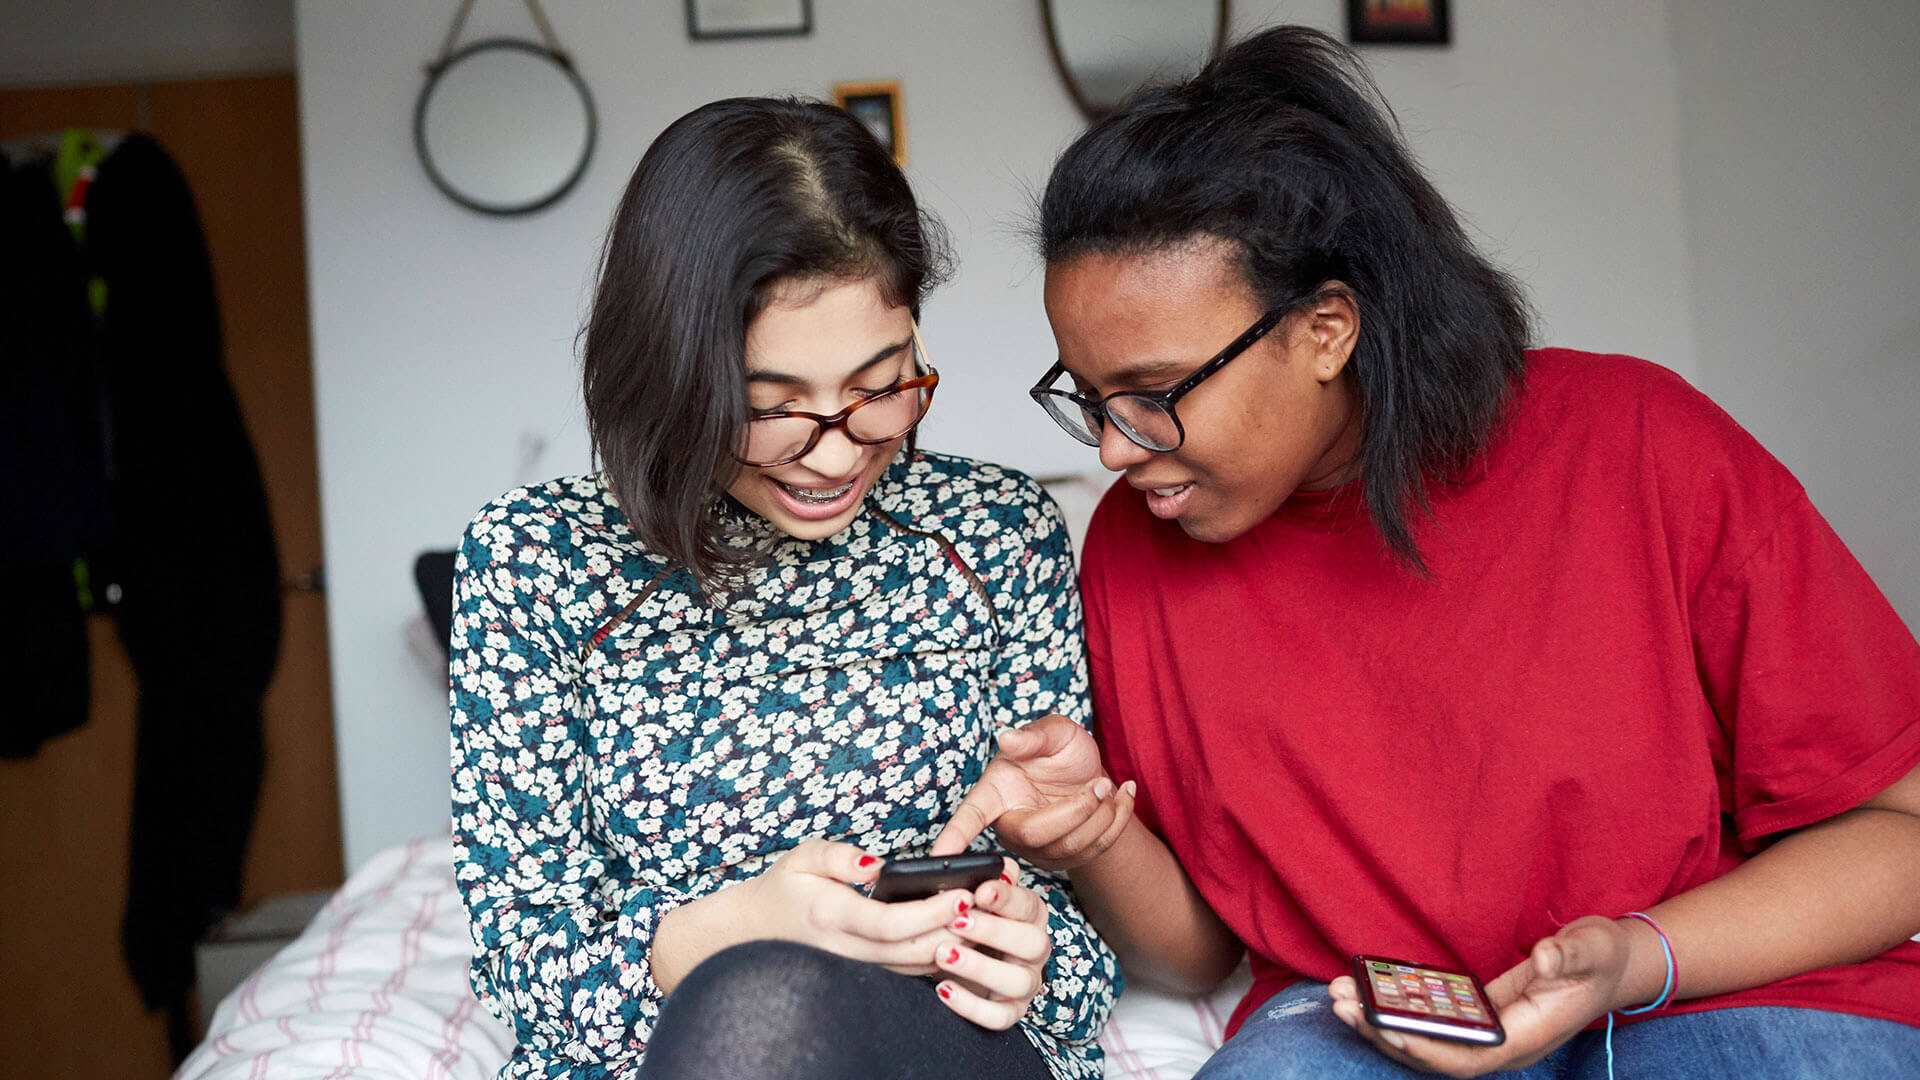 Two young people sitting together on the end of a bed and looking at their mobile phones.